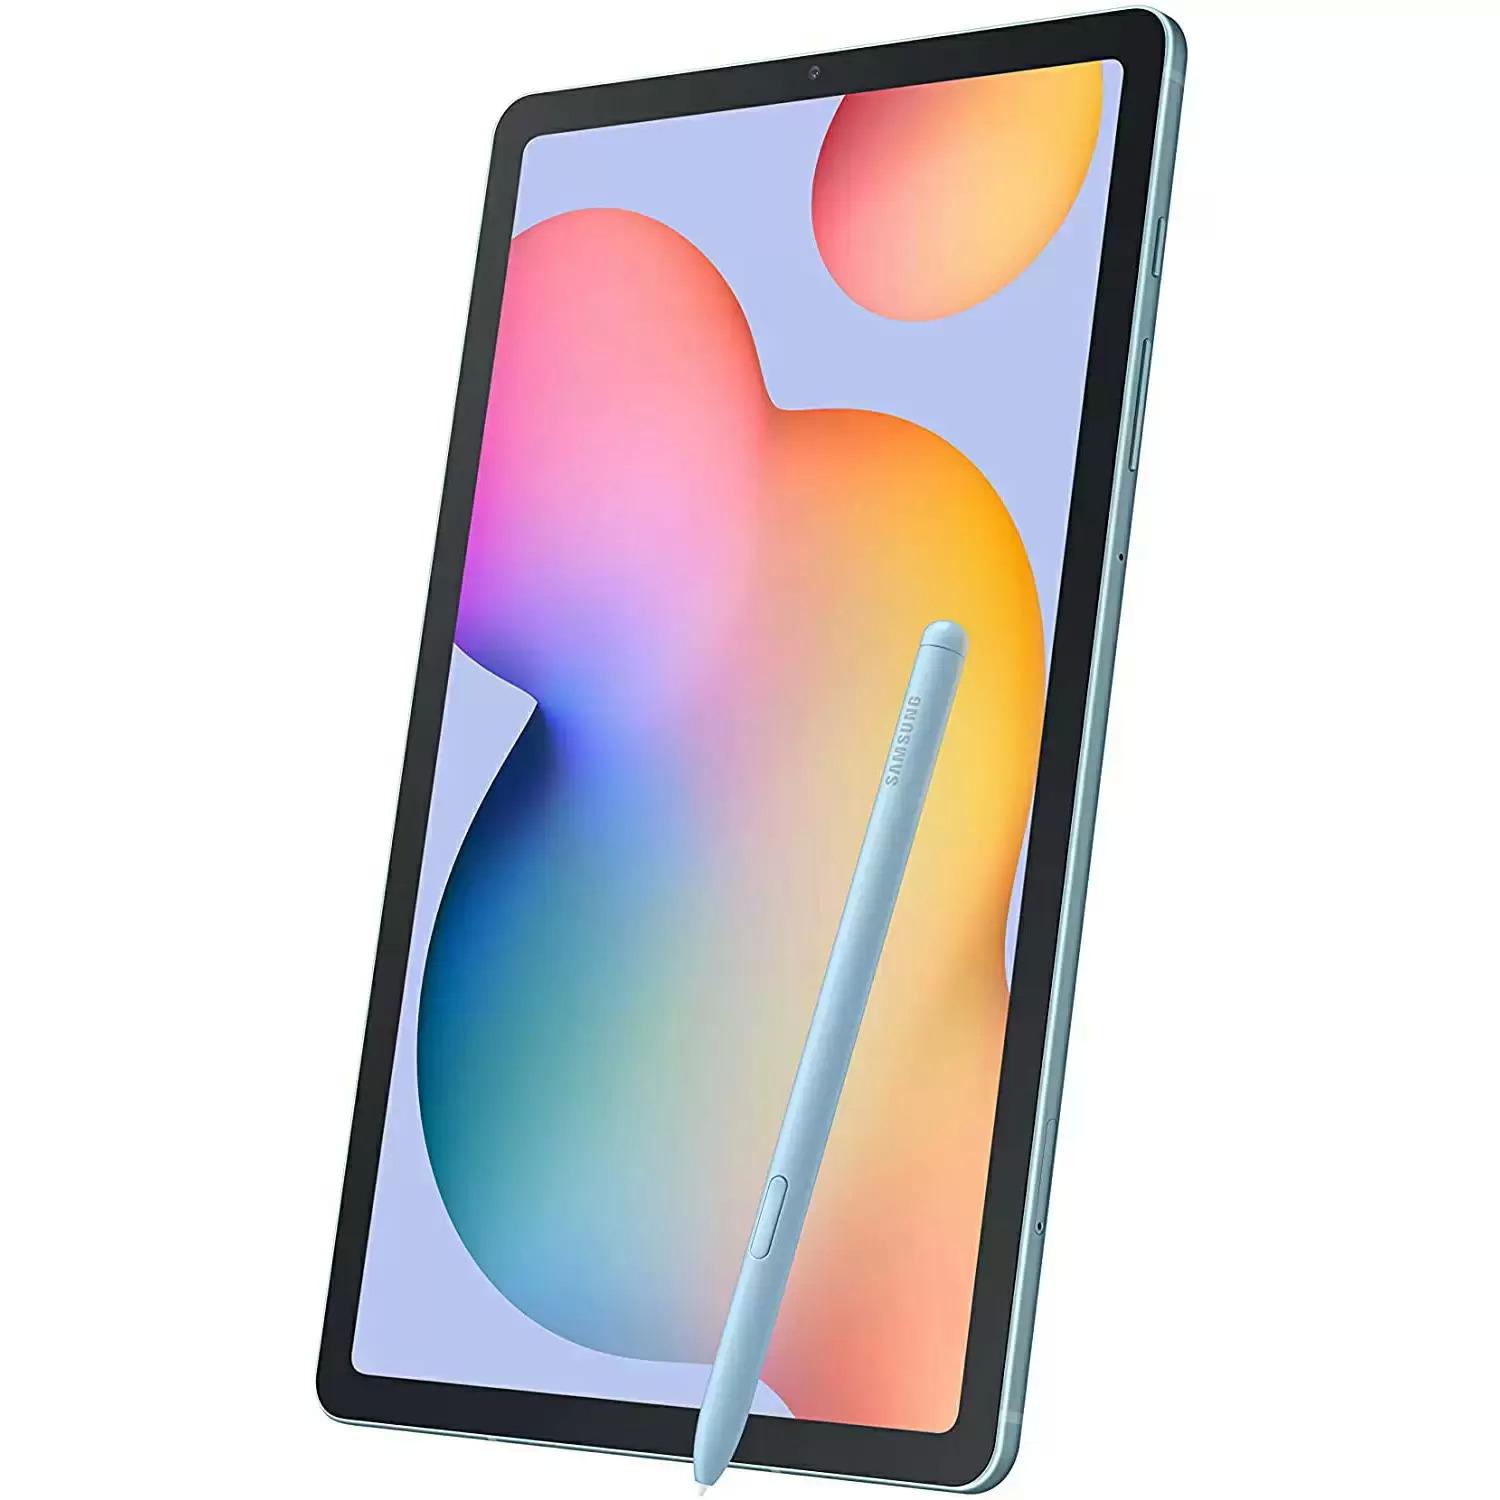 Samsung Galaxy Tab S6 Lite 10.4in 64GB Tablet with Pen for $249.99 Shipped